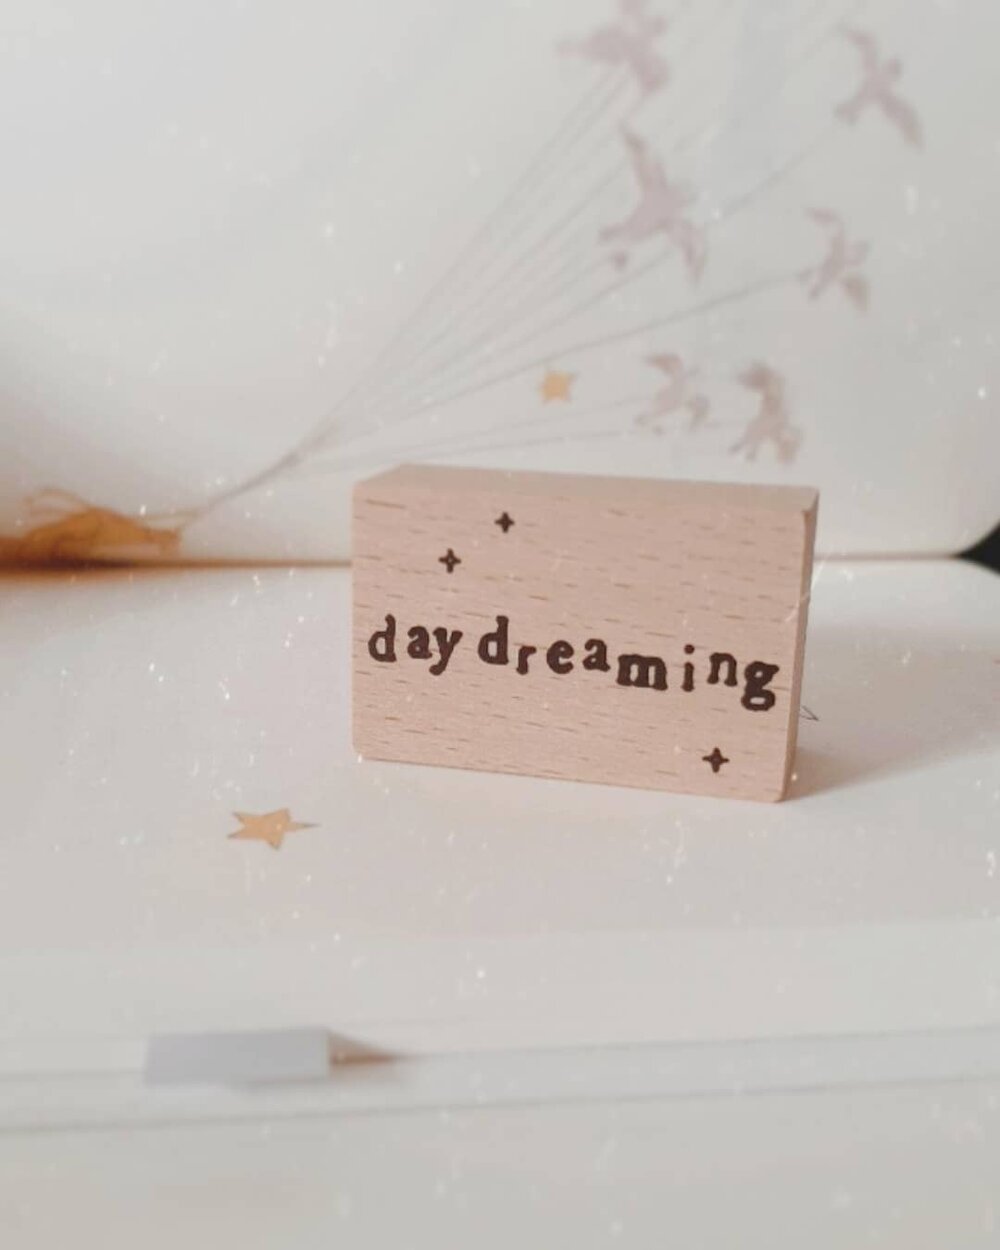 Yeon Charm Daydreaming Rubber Stamp, 1 pc